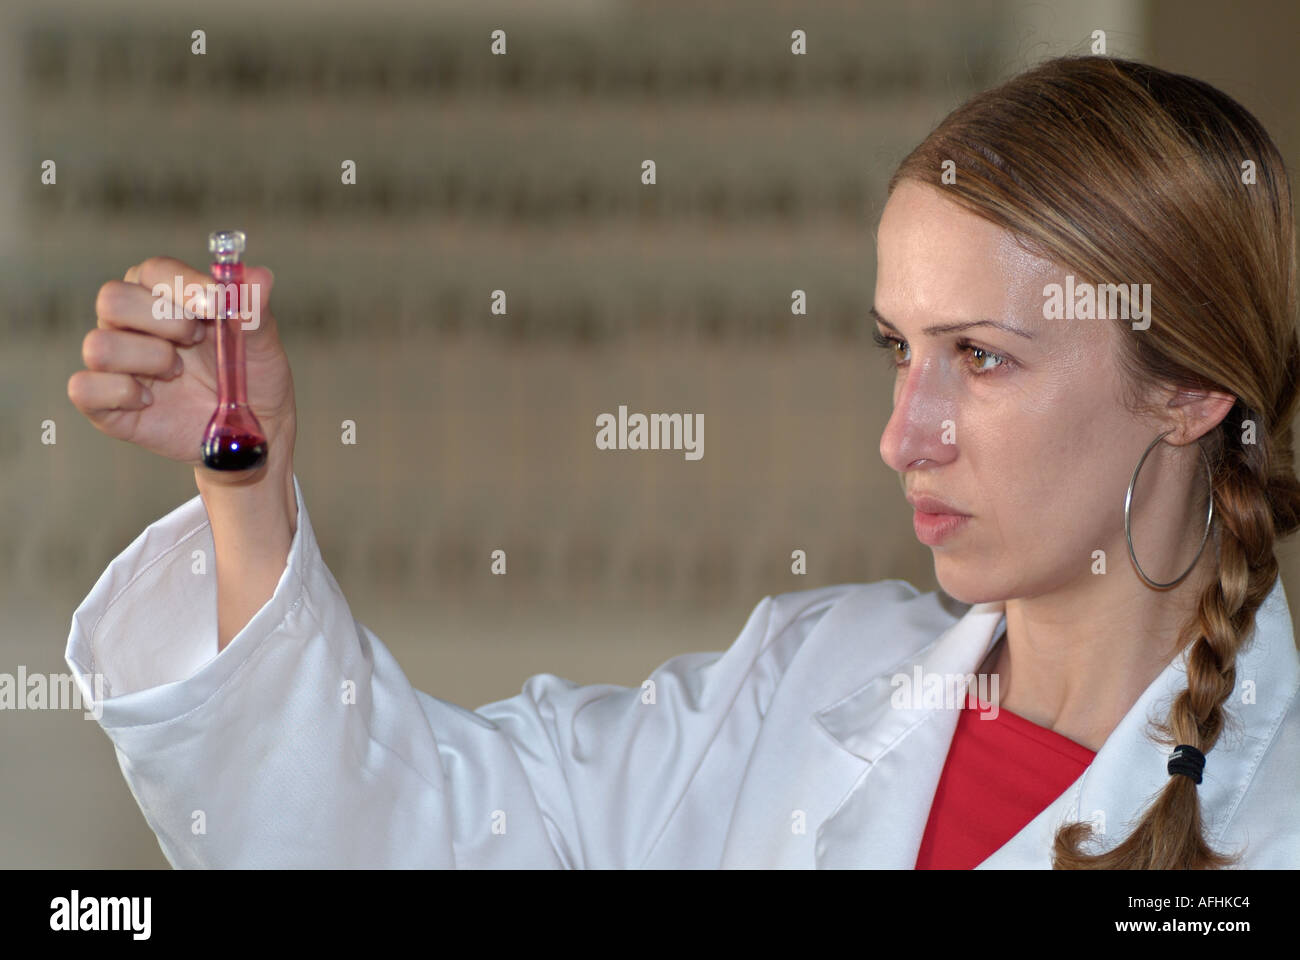 Scientist Studying the Content of a Test Tube in a Laboratory Stock Photo